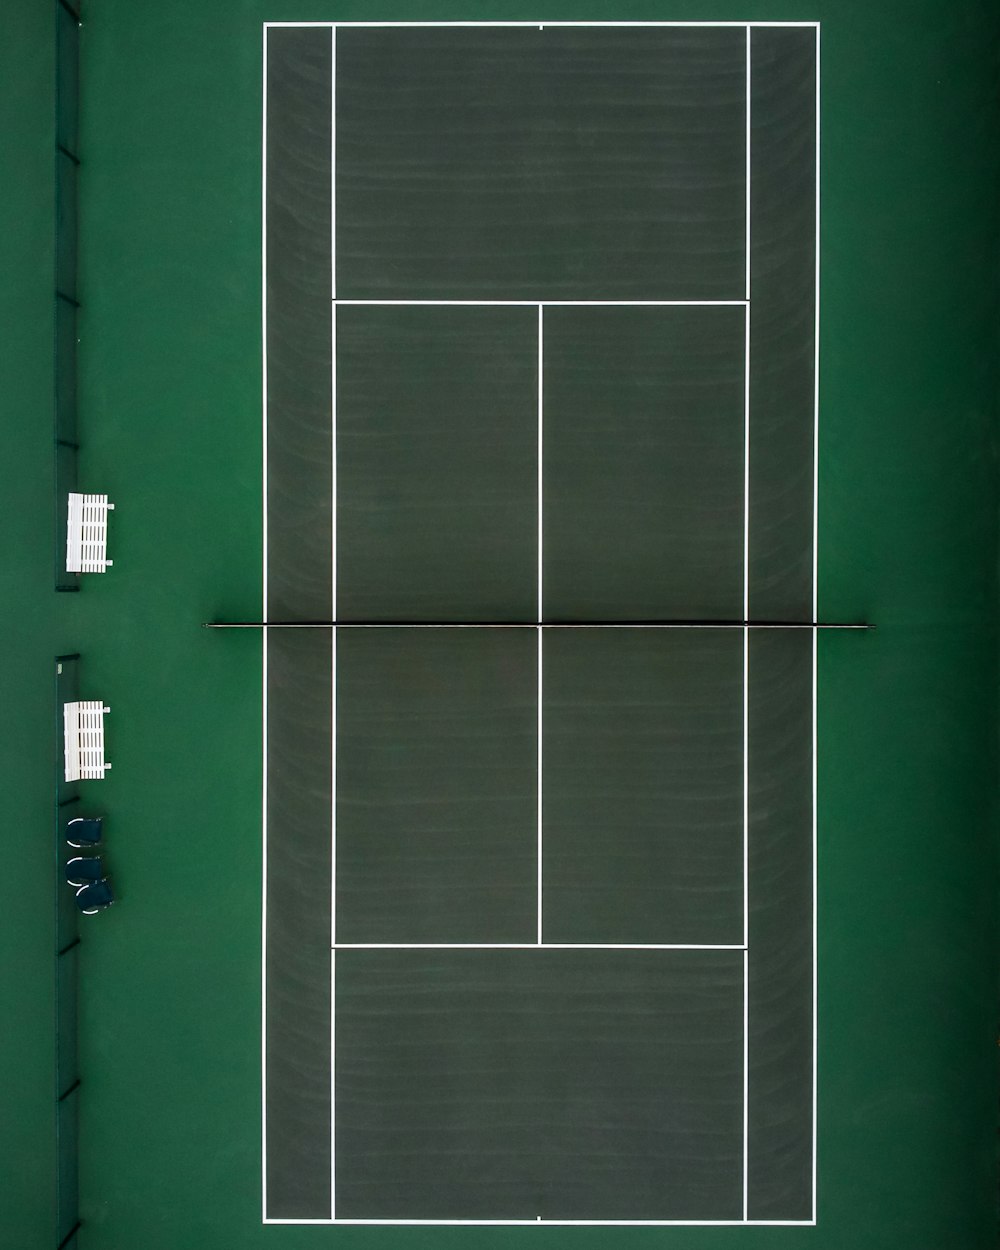 Tennis Court Pictures Download Free Images On Unsplash